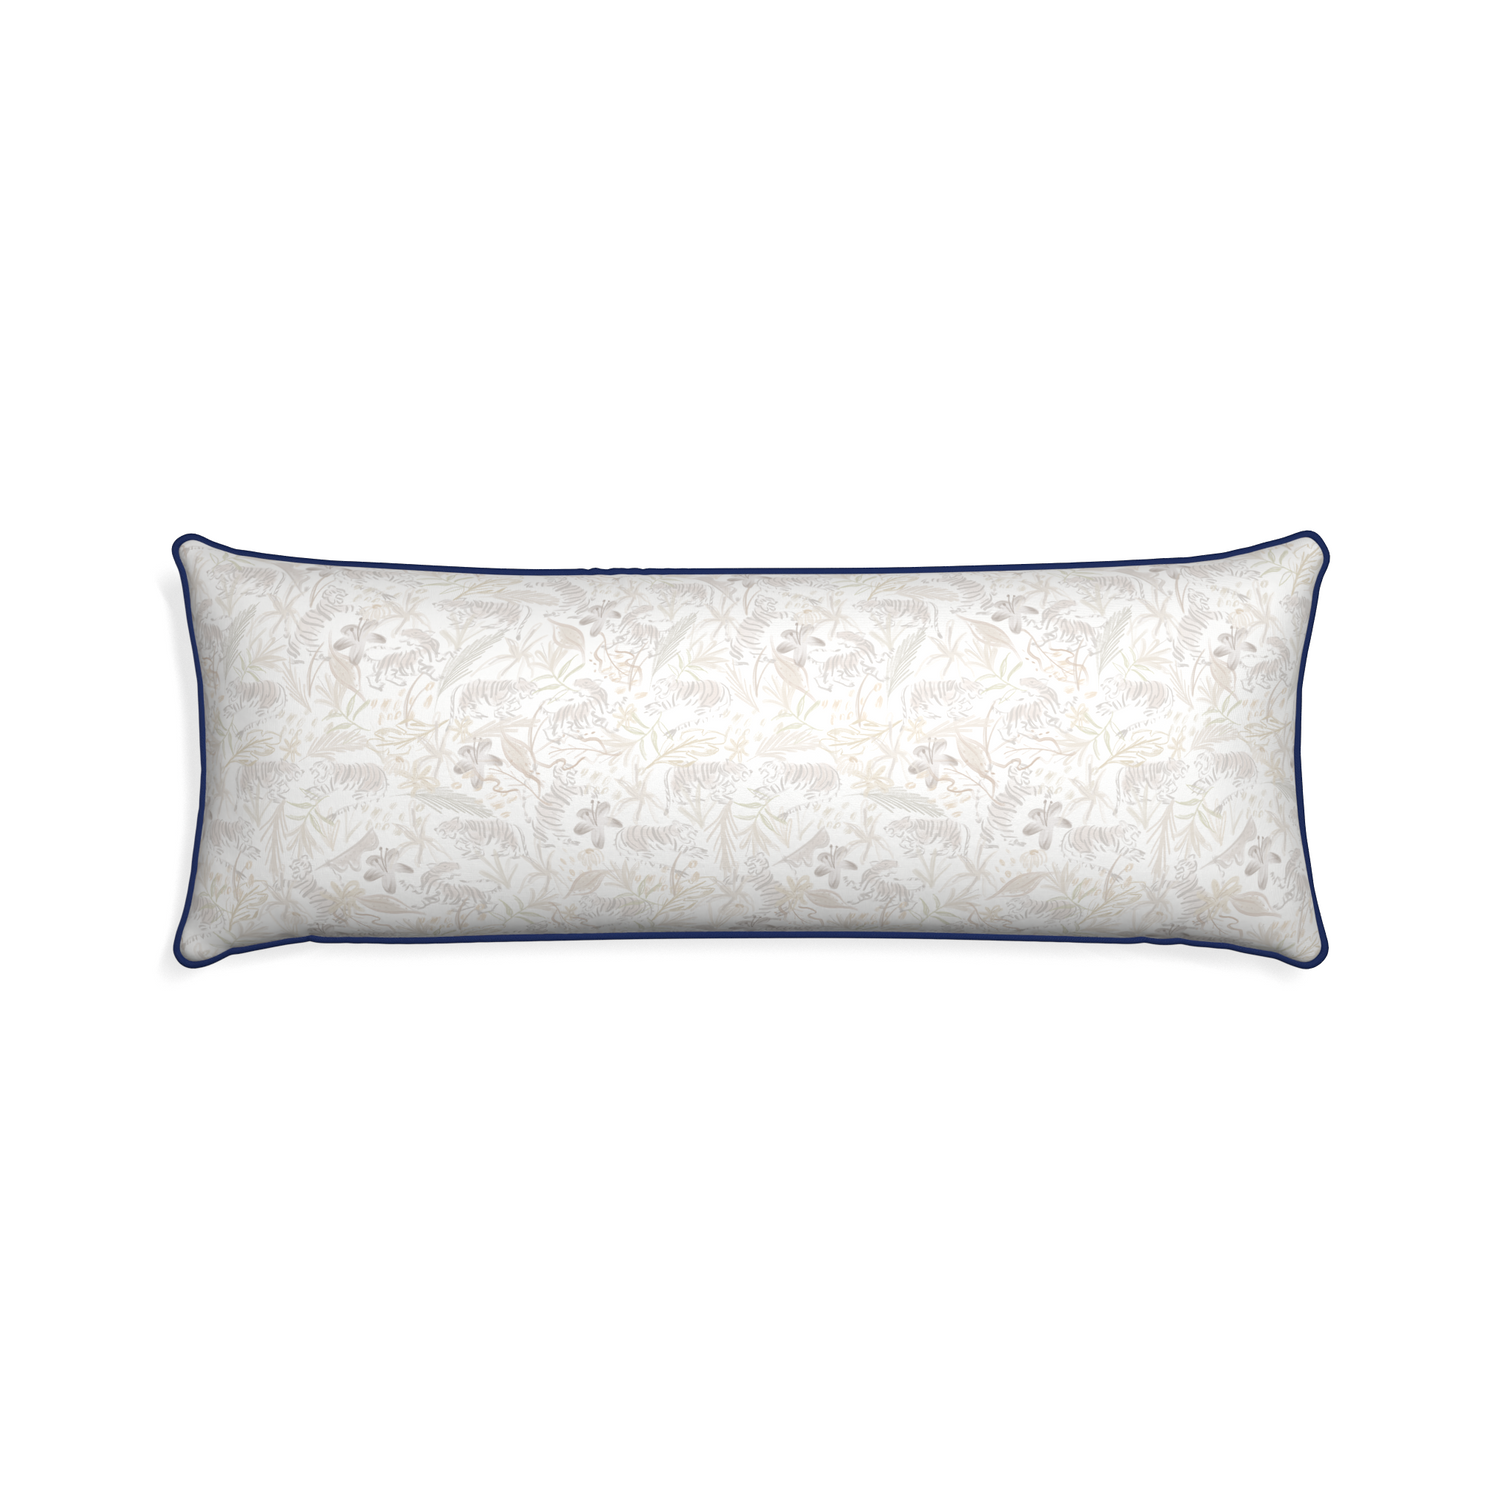 Xl-lumbar frida sand custom pillow with midnight piping on white background